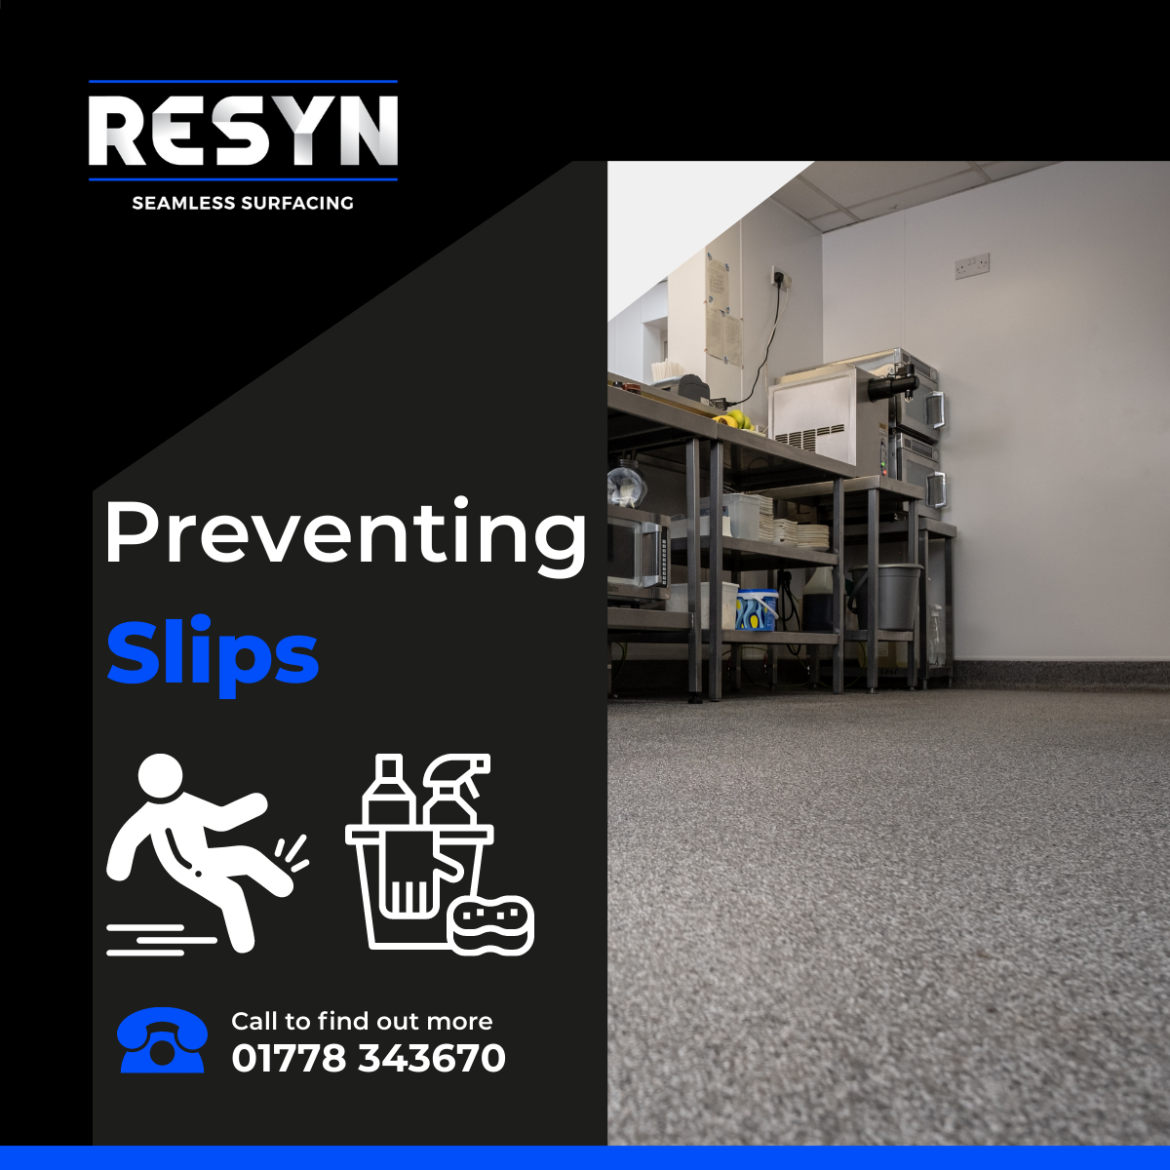 RESYN helping companies Preventing slips with a resin floor. anti slip resin flooring suppliers